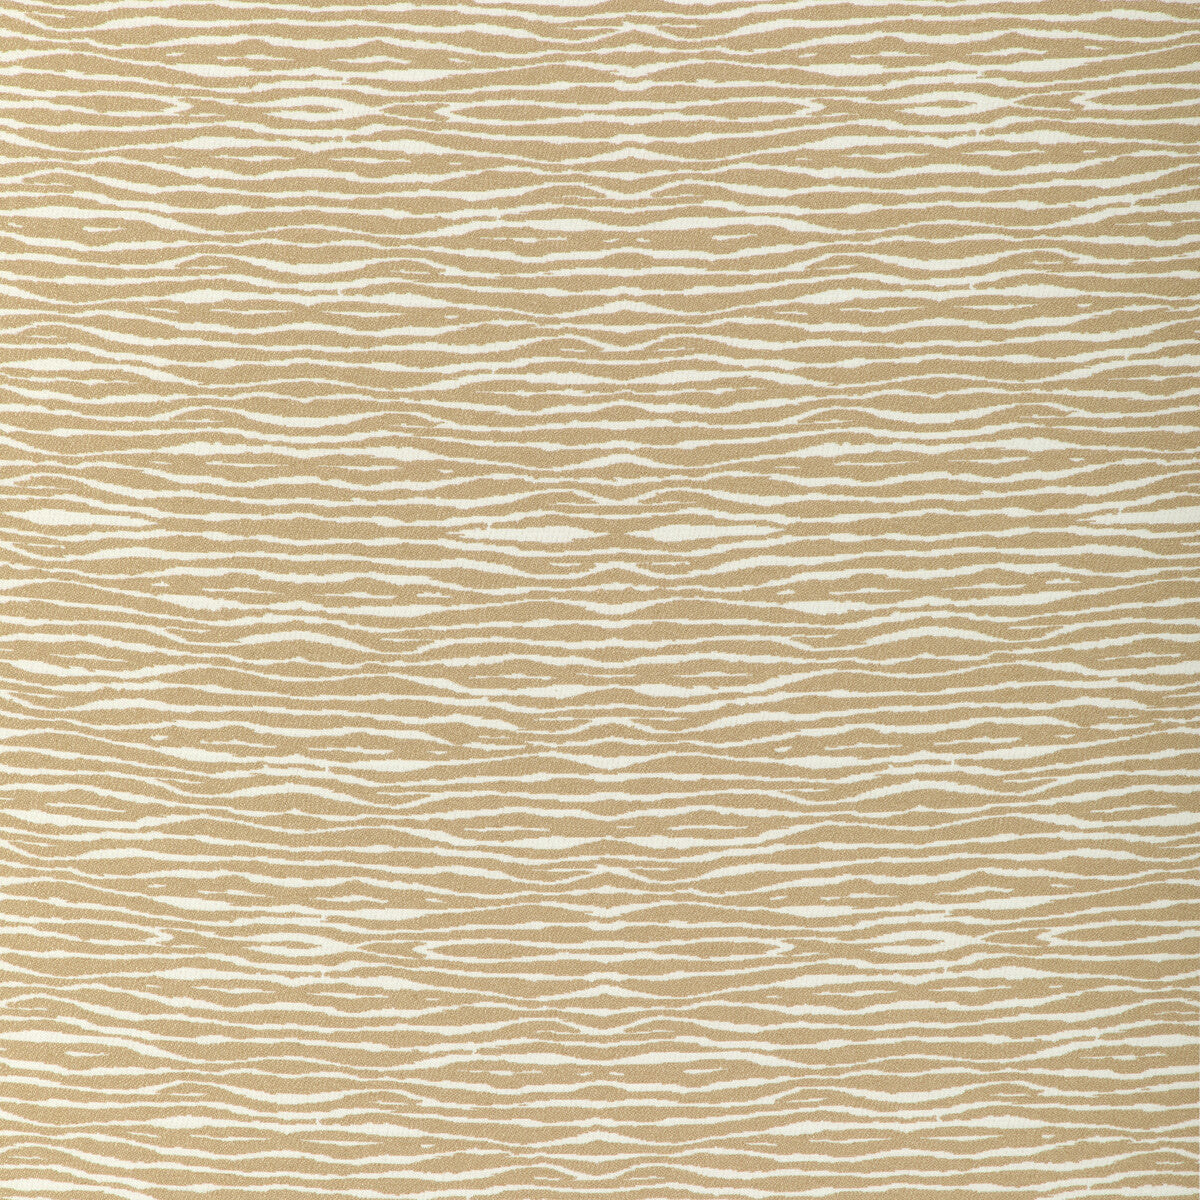 Kravet Design fabric in 37183-1161 color - pattern 37183.1161.0 - by Kravet Design in the Woven Colors collection